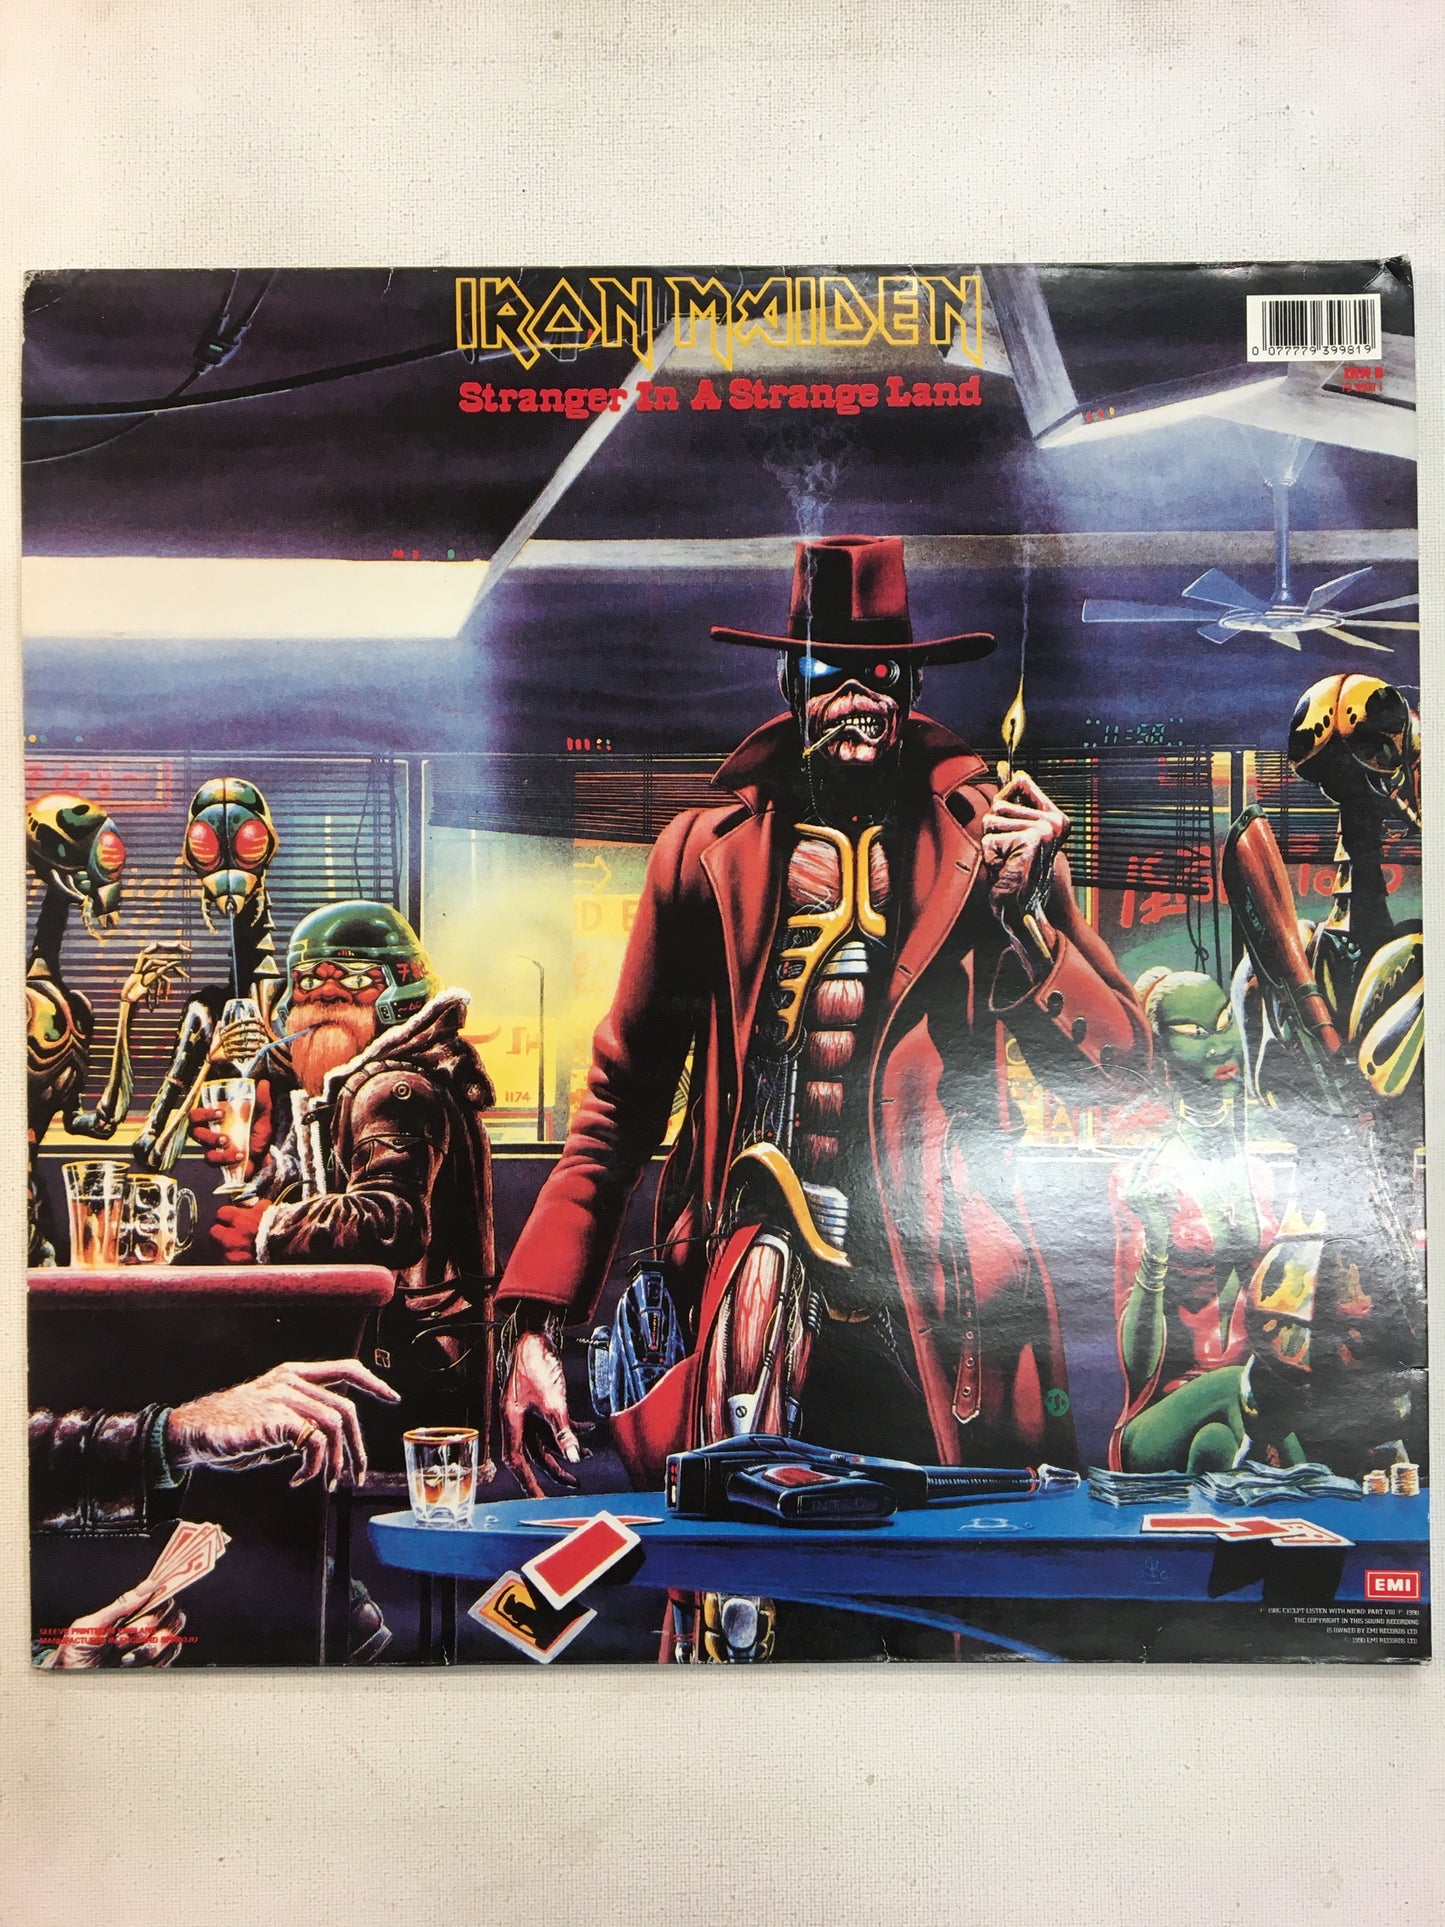 IRON MAIDEN 2 x 12” WASTED YEARS : from the 1st 10 yrs collection